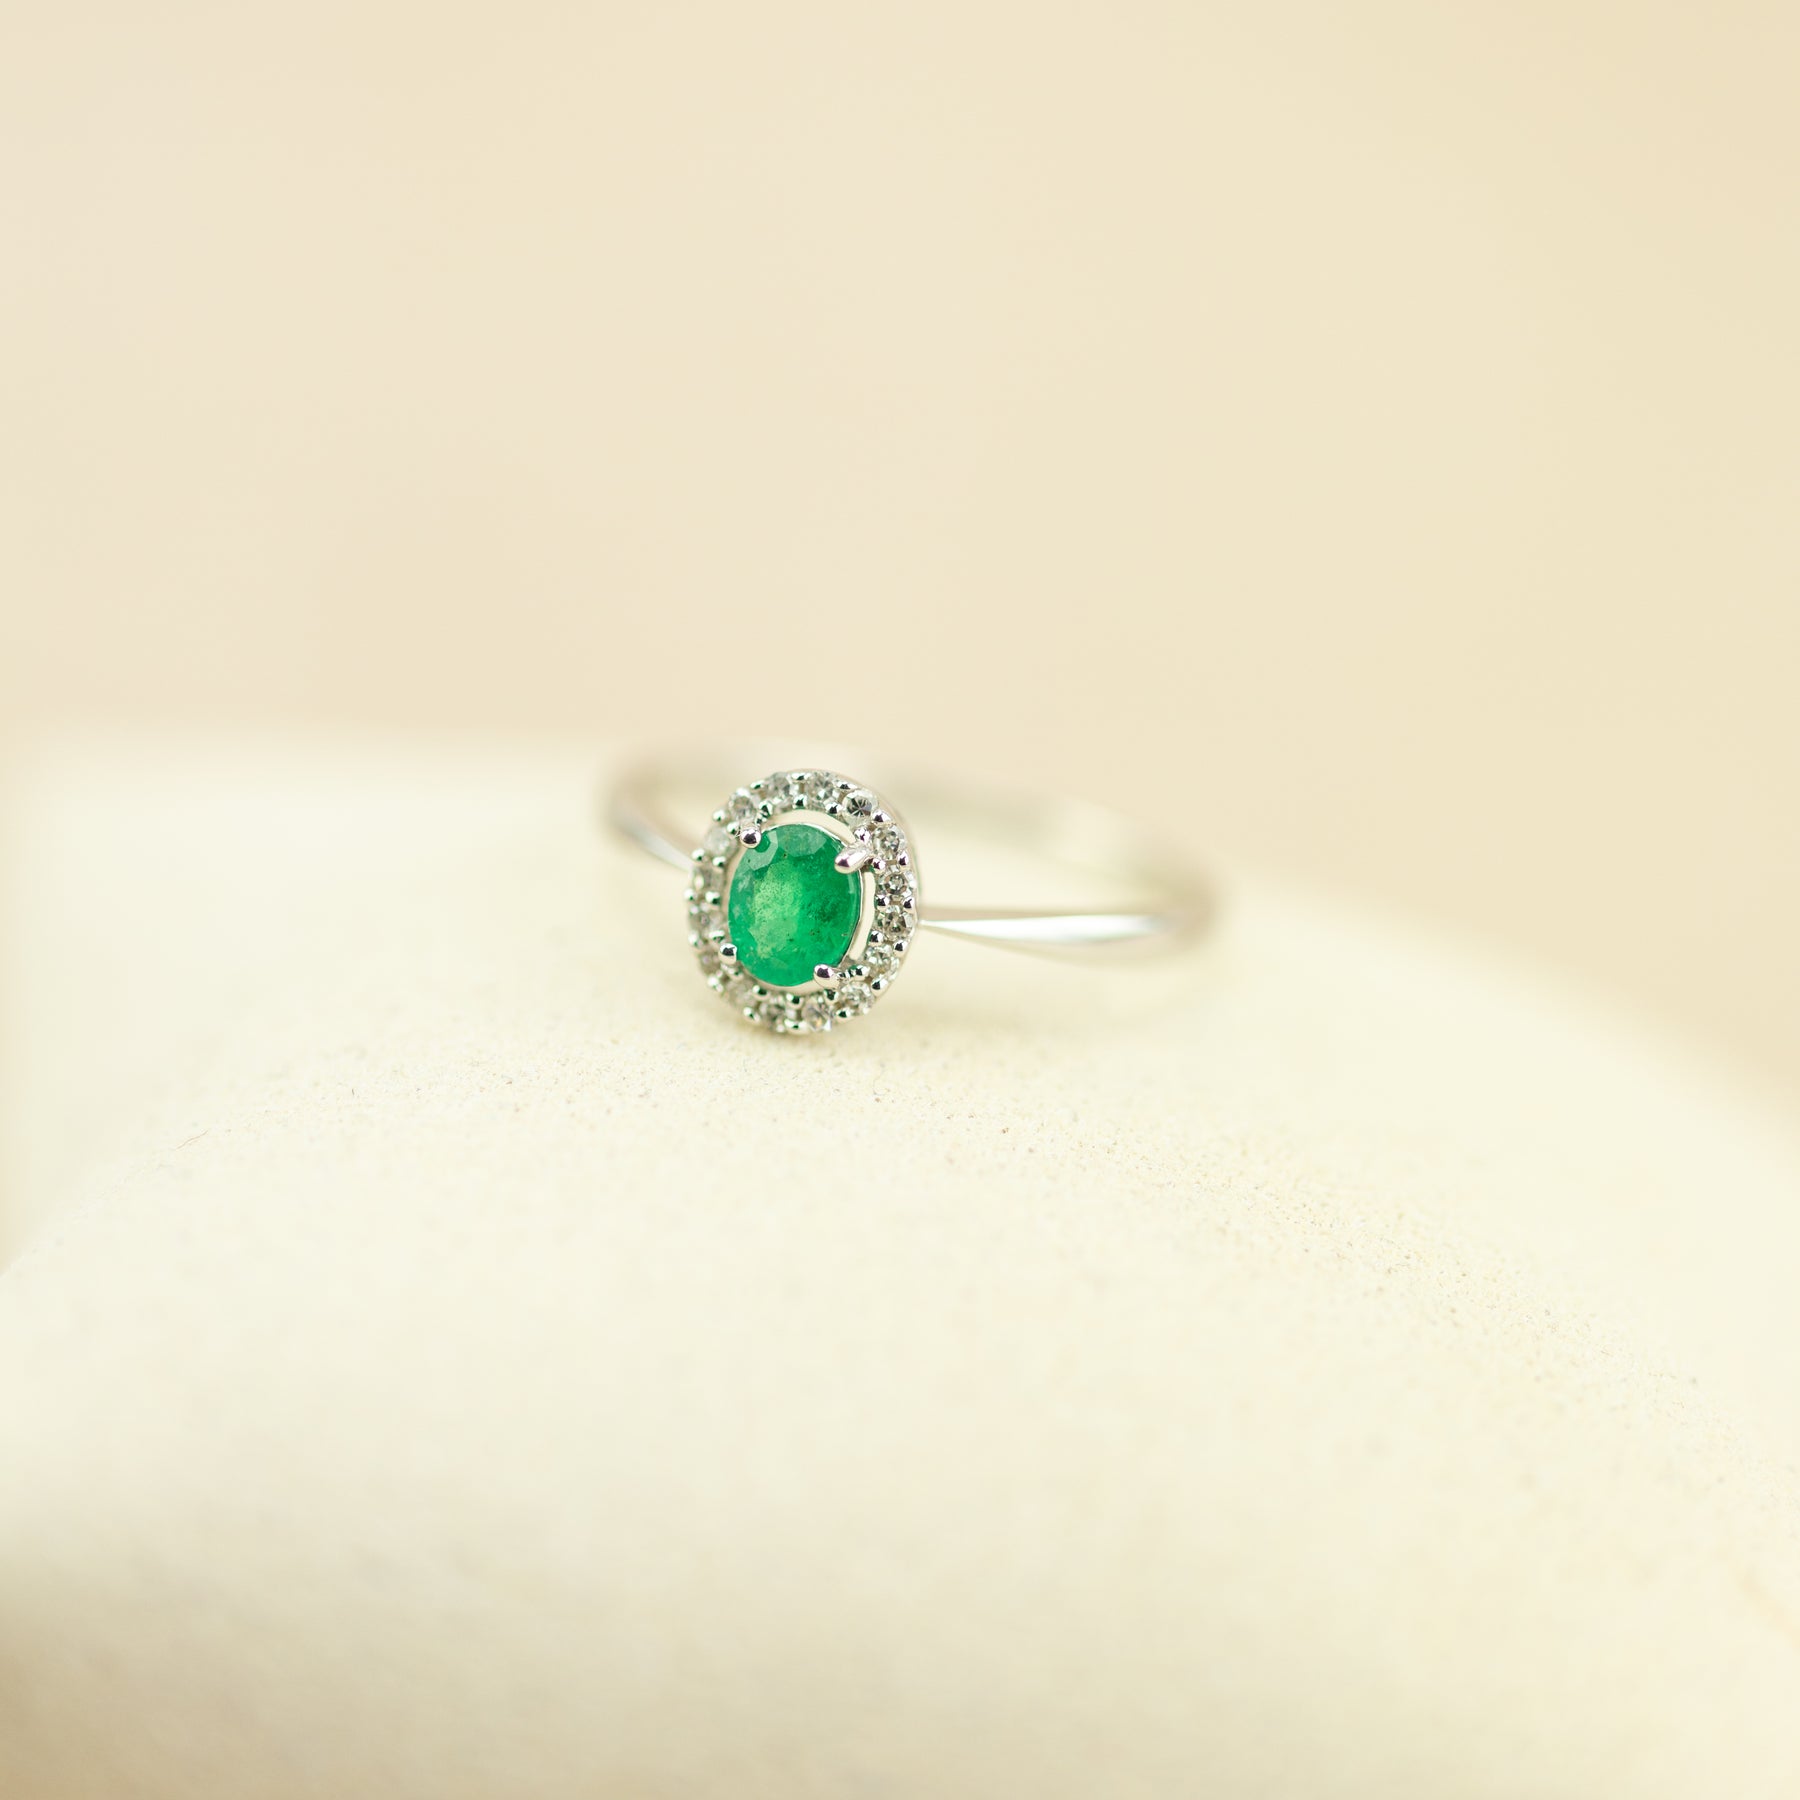 9ct white gold emerald and diamond halo ring